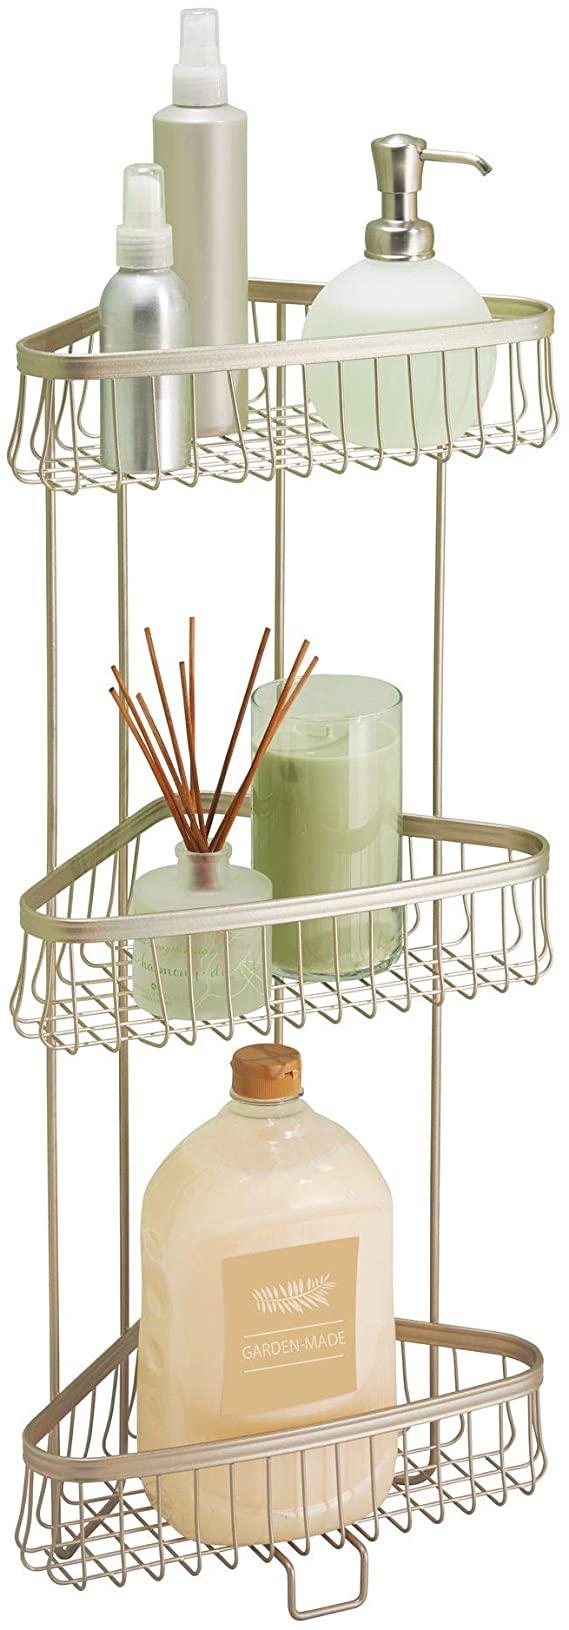 I'm a Shopping Writer, and This Standing Shower Caddy Is My Favorite Amazon Purchase to Date